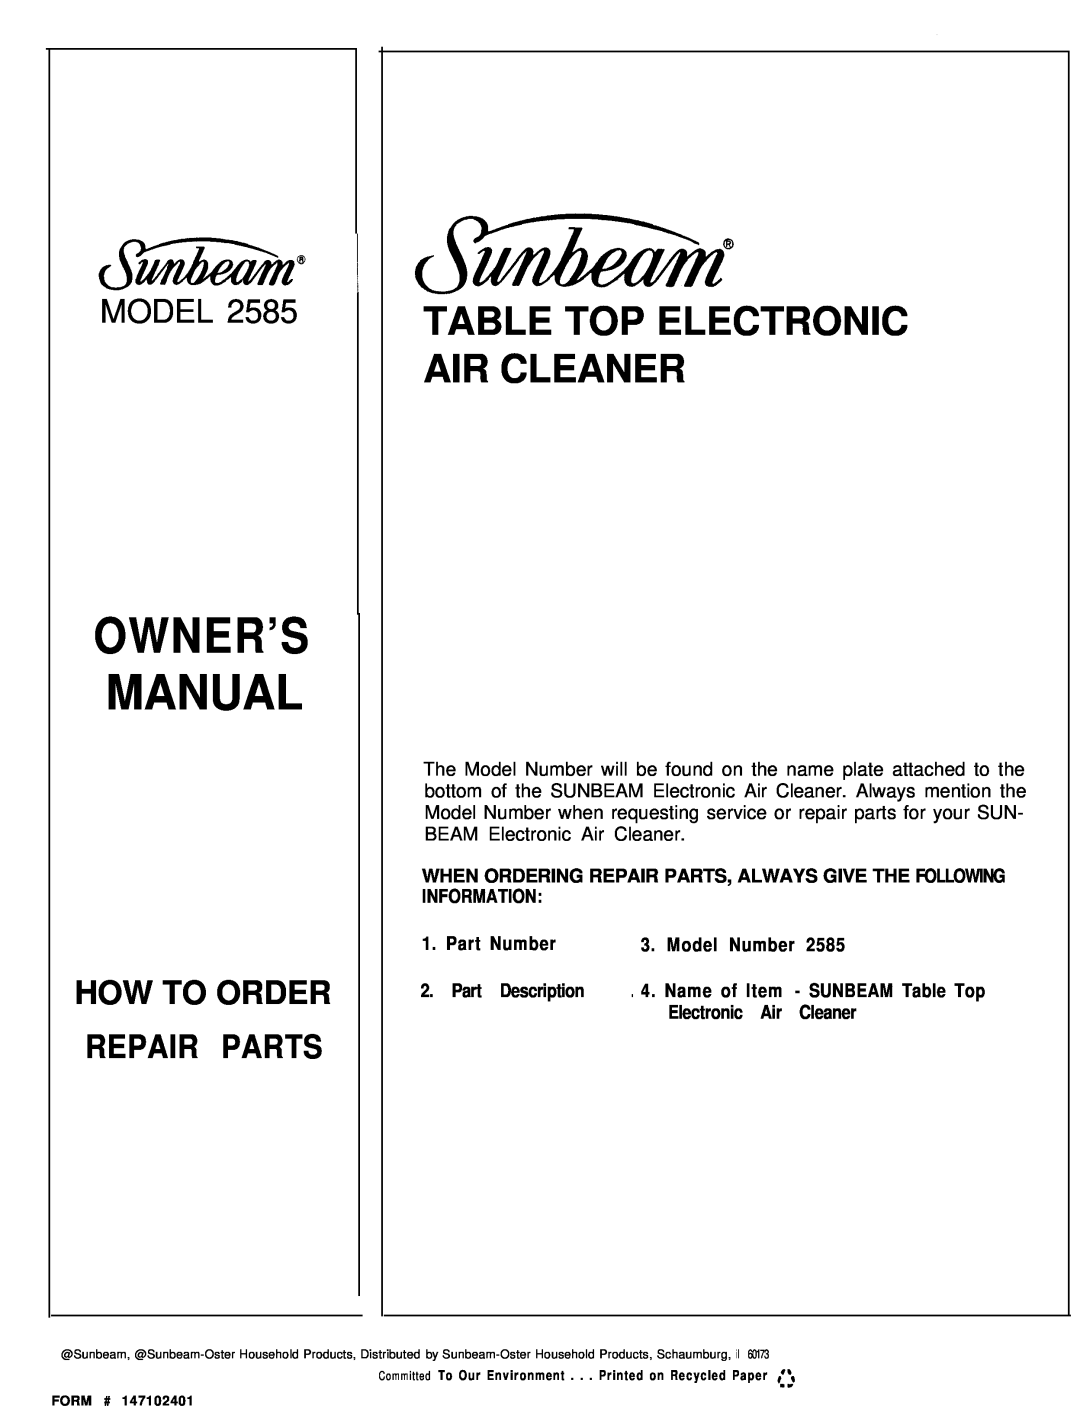 Sunbeam 2585 manual Model, Table Top Electronic Air Cleaner, How To Order Repair Parts 